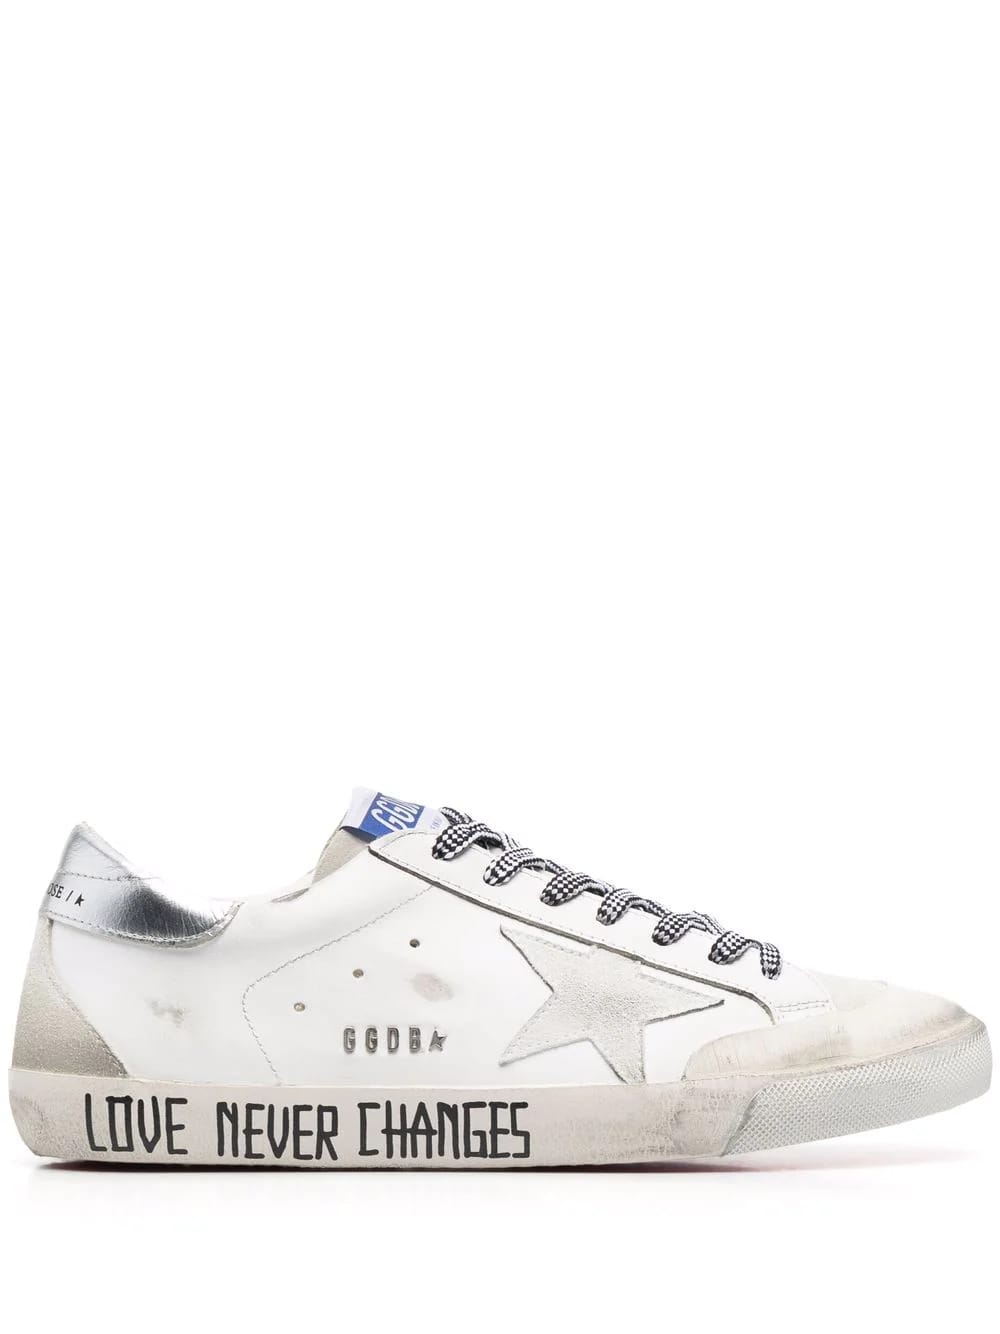 Golden Goose Man White And Silver Super-star Sneakers